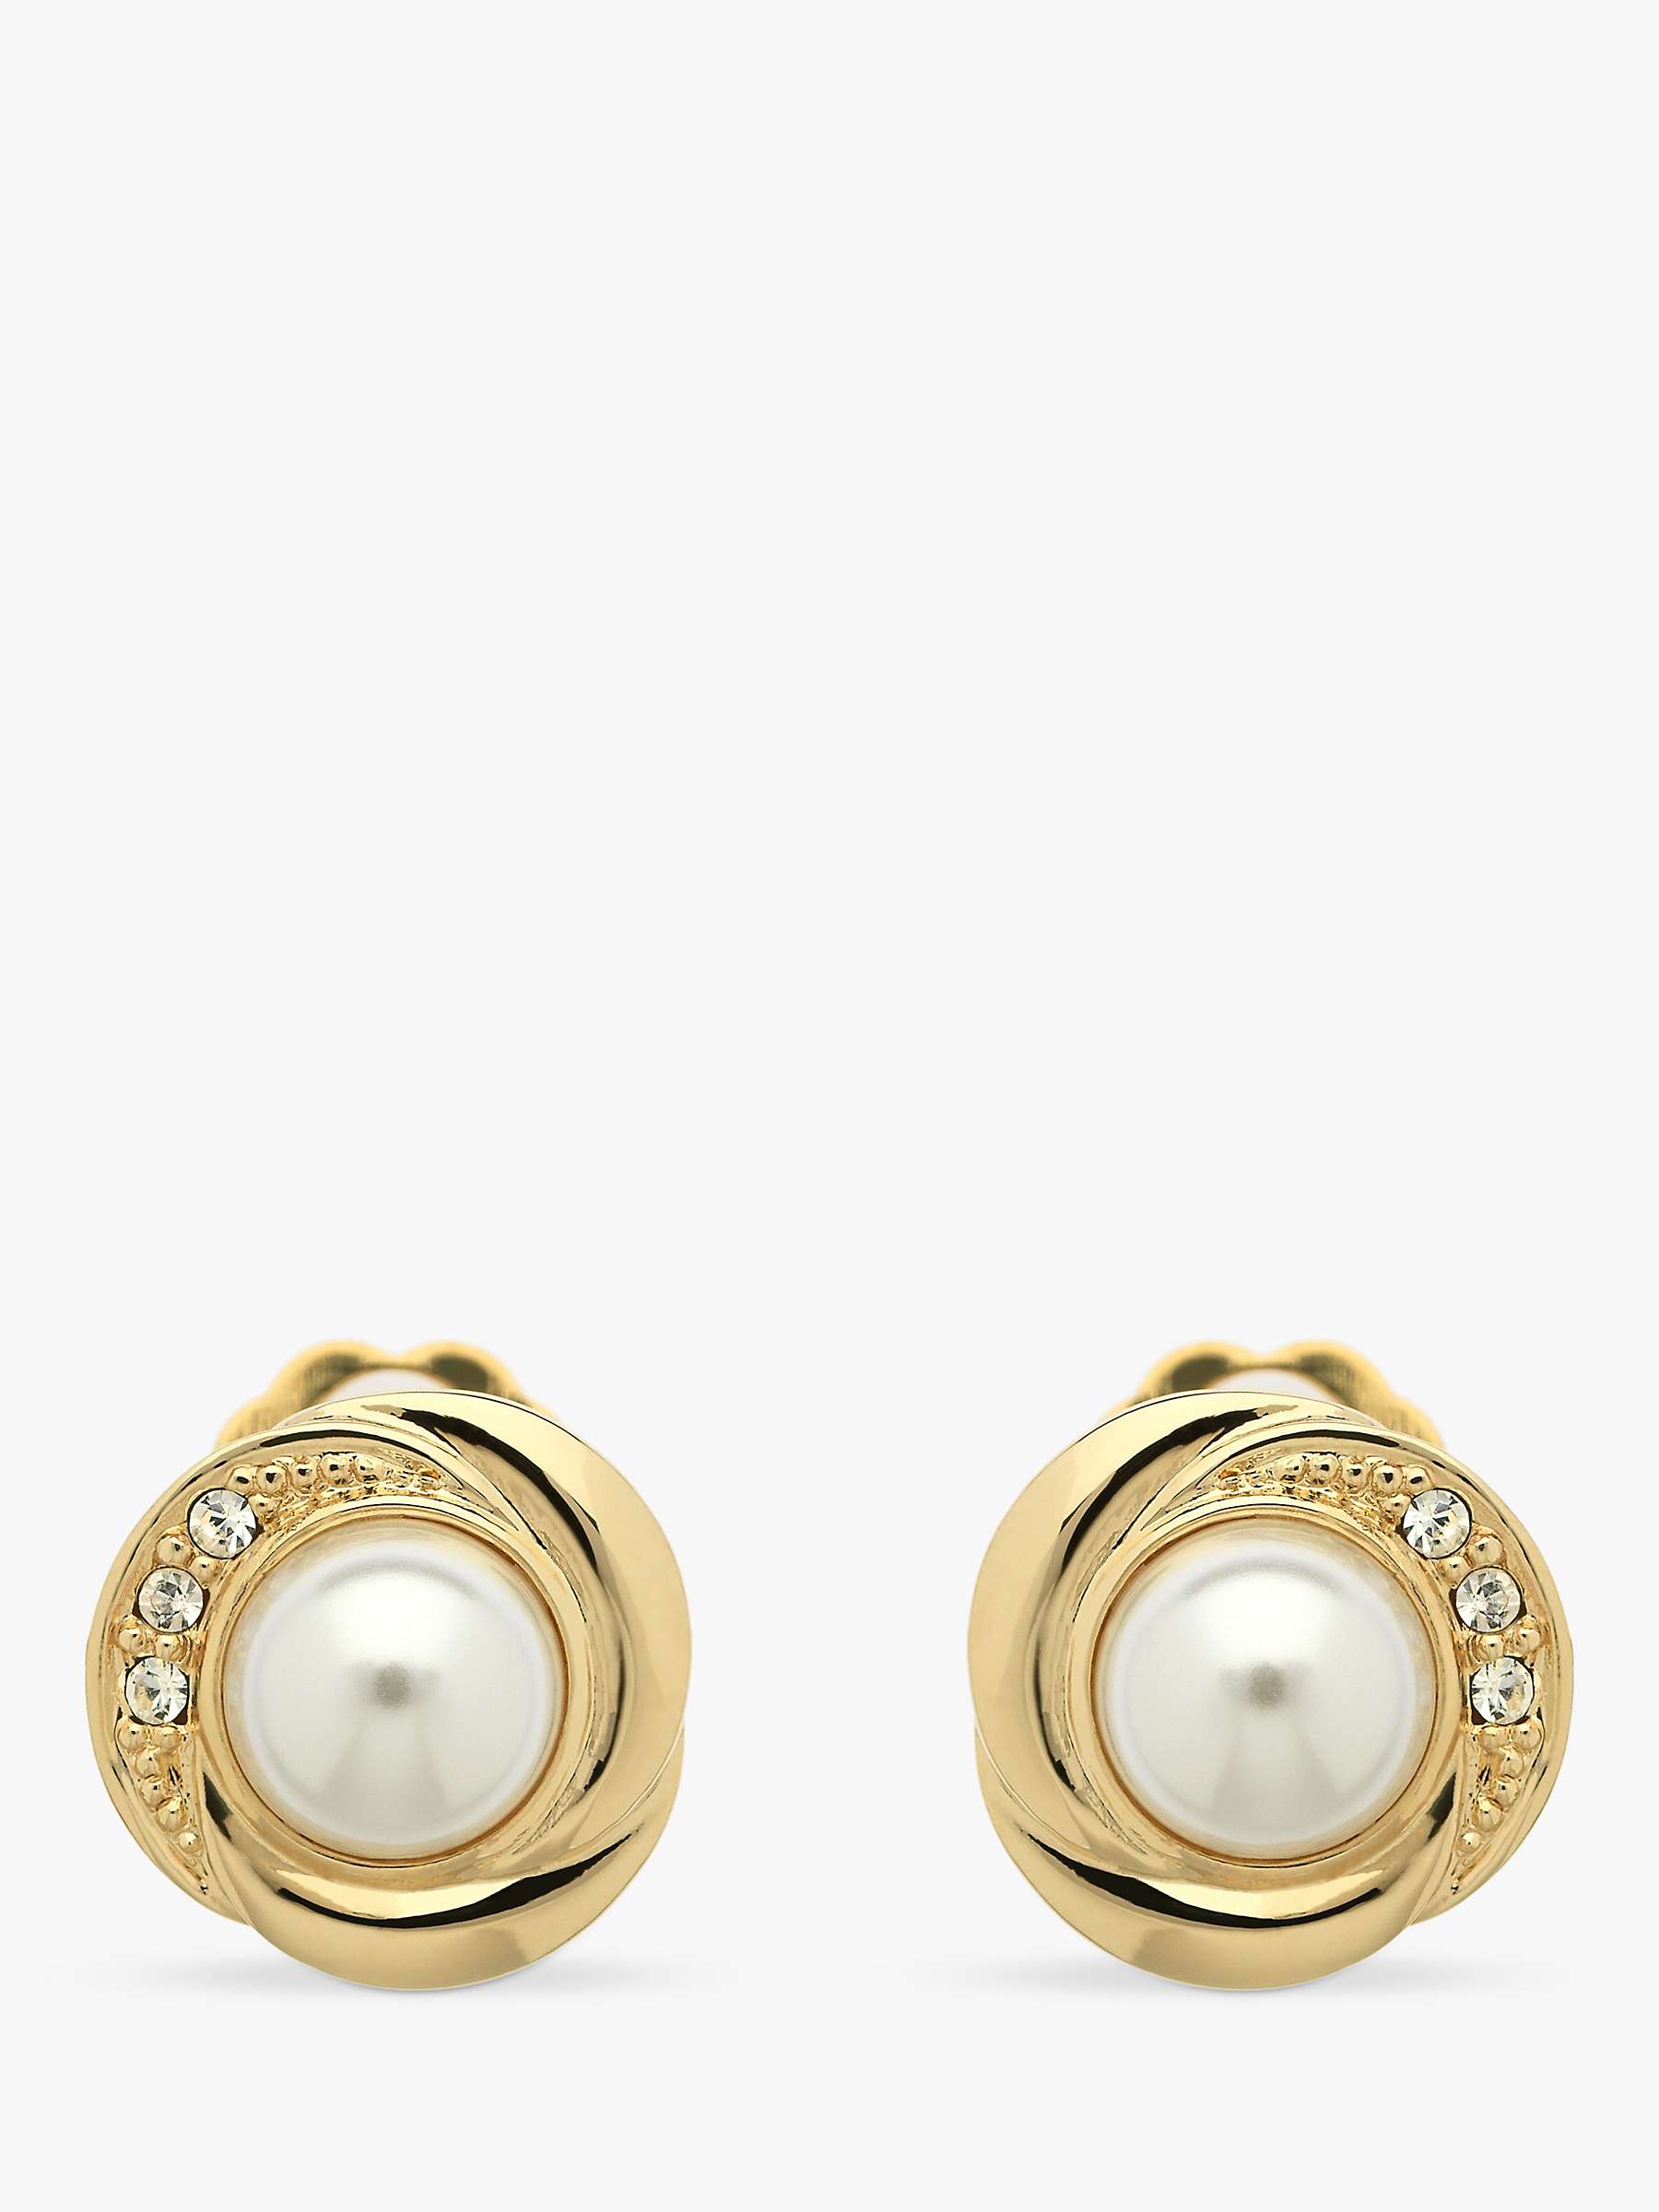 Buy Emma Holland Faux Pearl and Crystal Clip-On Earrings, Gold Online at johnlewis.com